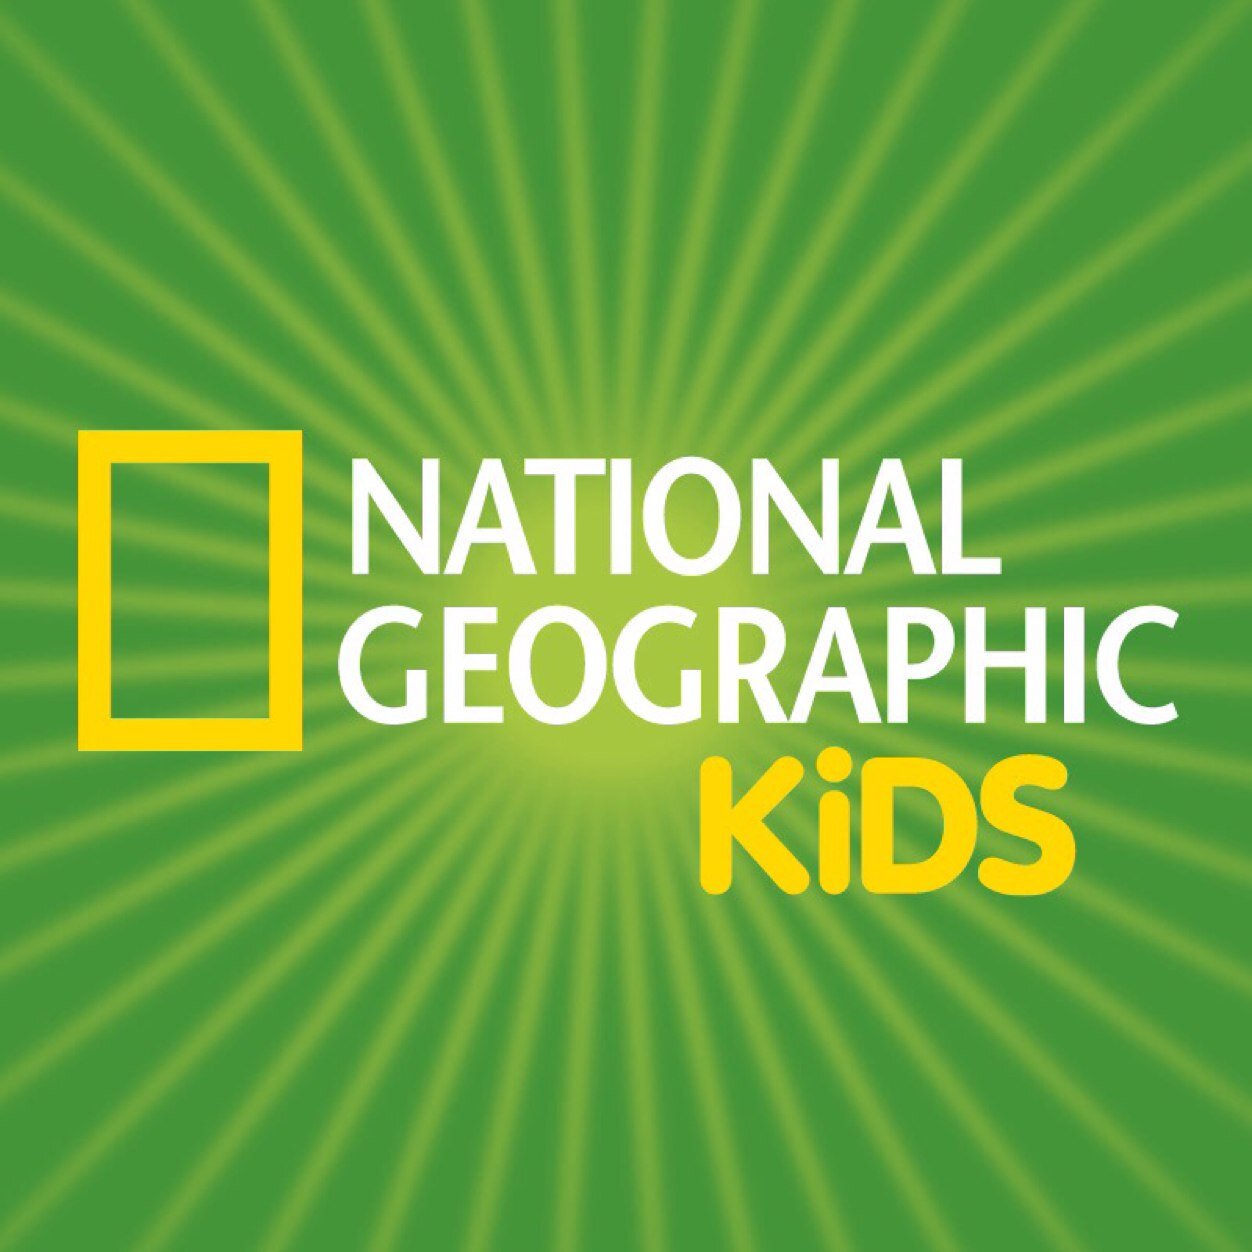 #kidlit children’s books, nonfiction, literacy, reviews & fun facts. National Geographic Kids Books & more. Send comments/questions. We can’t wait to connect!